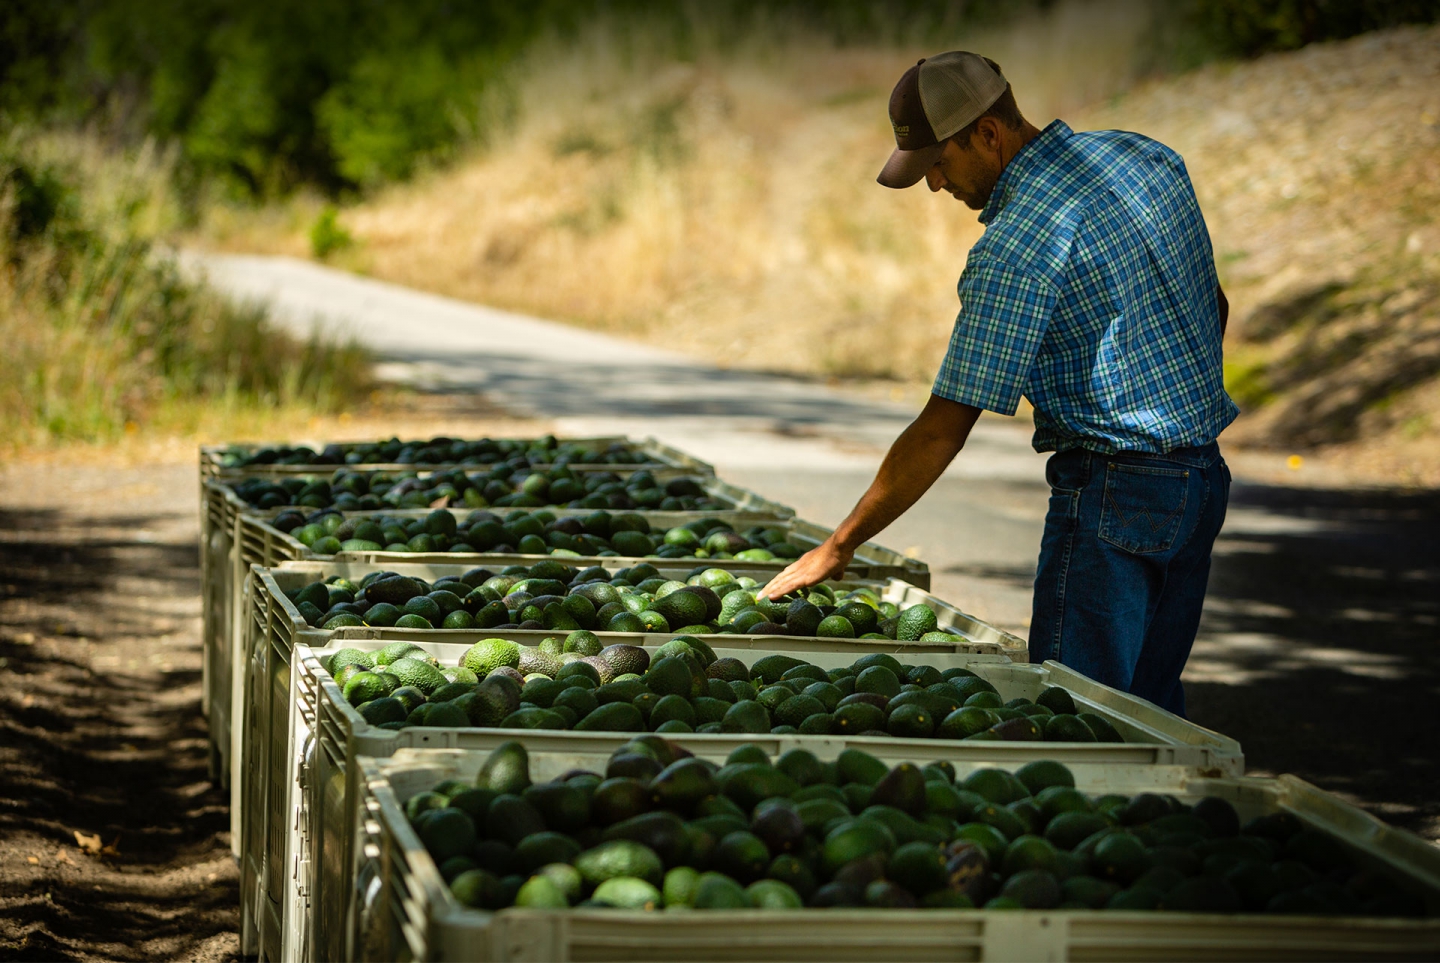 U.S. On Track to Consume More Avocados in 2020